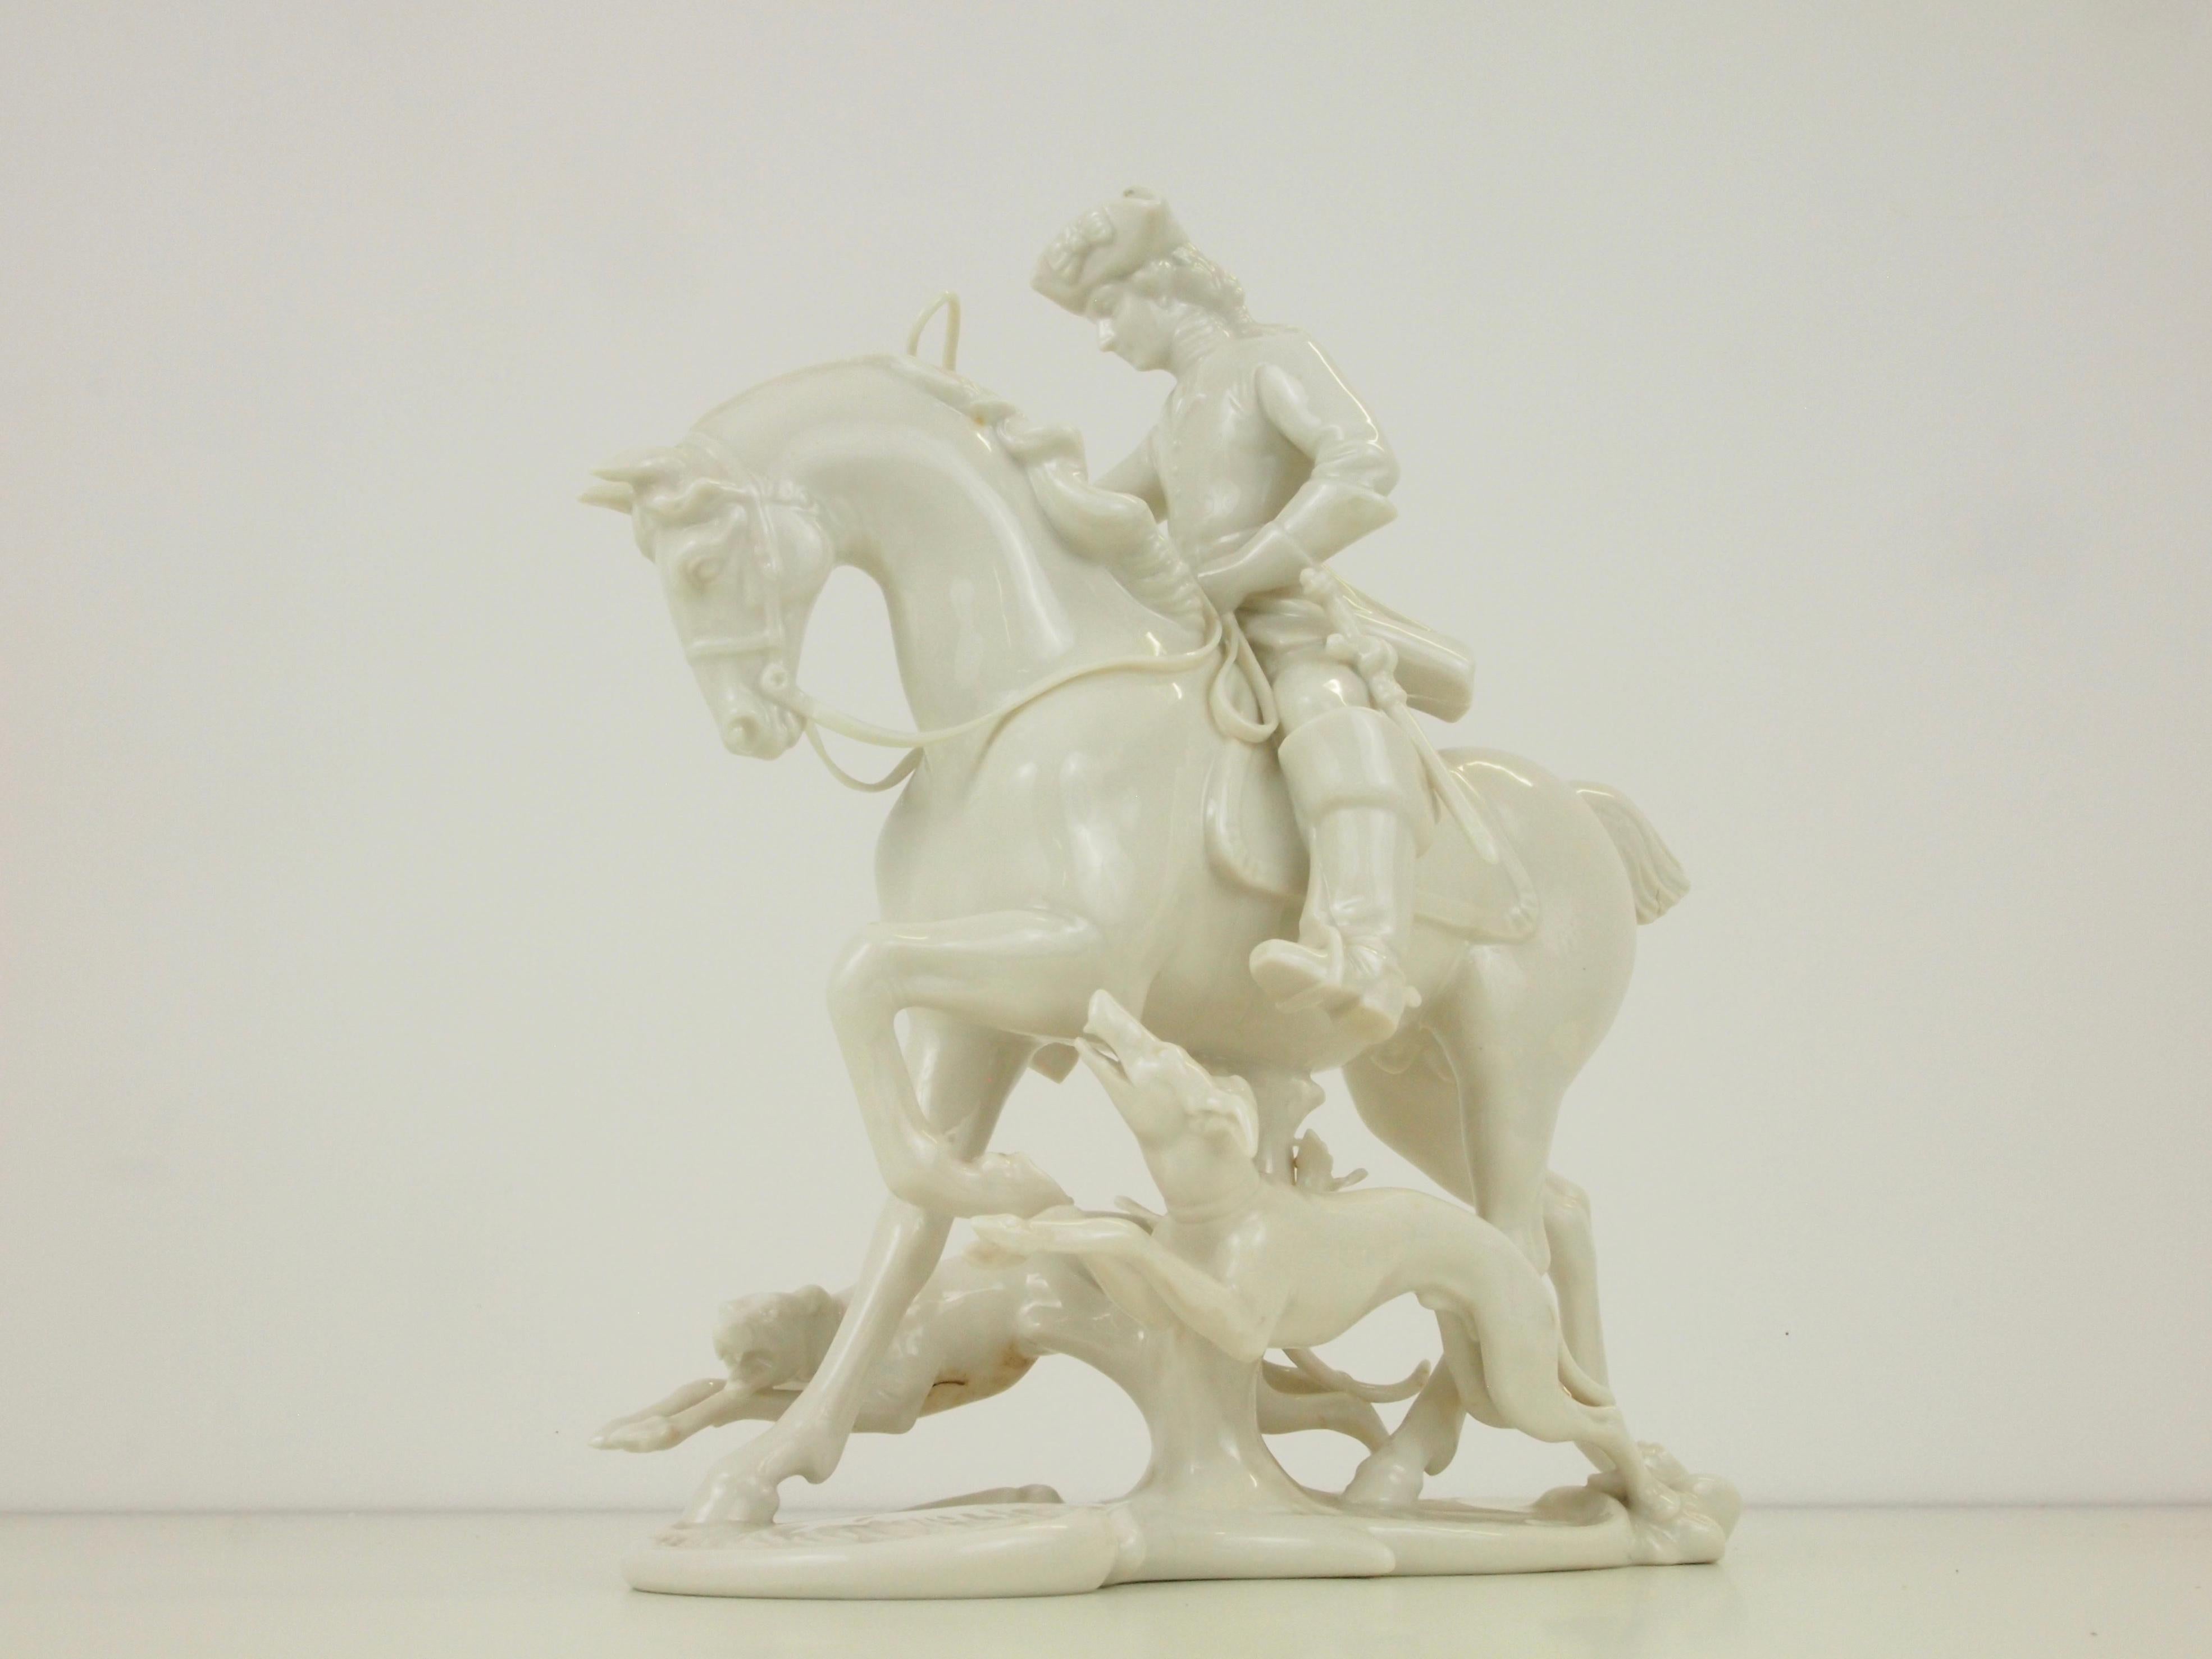 Nymphenburg Porcelain Figurine Depicting a Horse Rider in a Hunting Scene For Sale 7